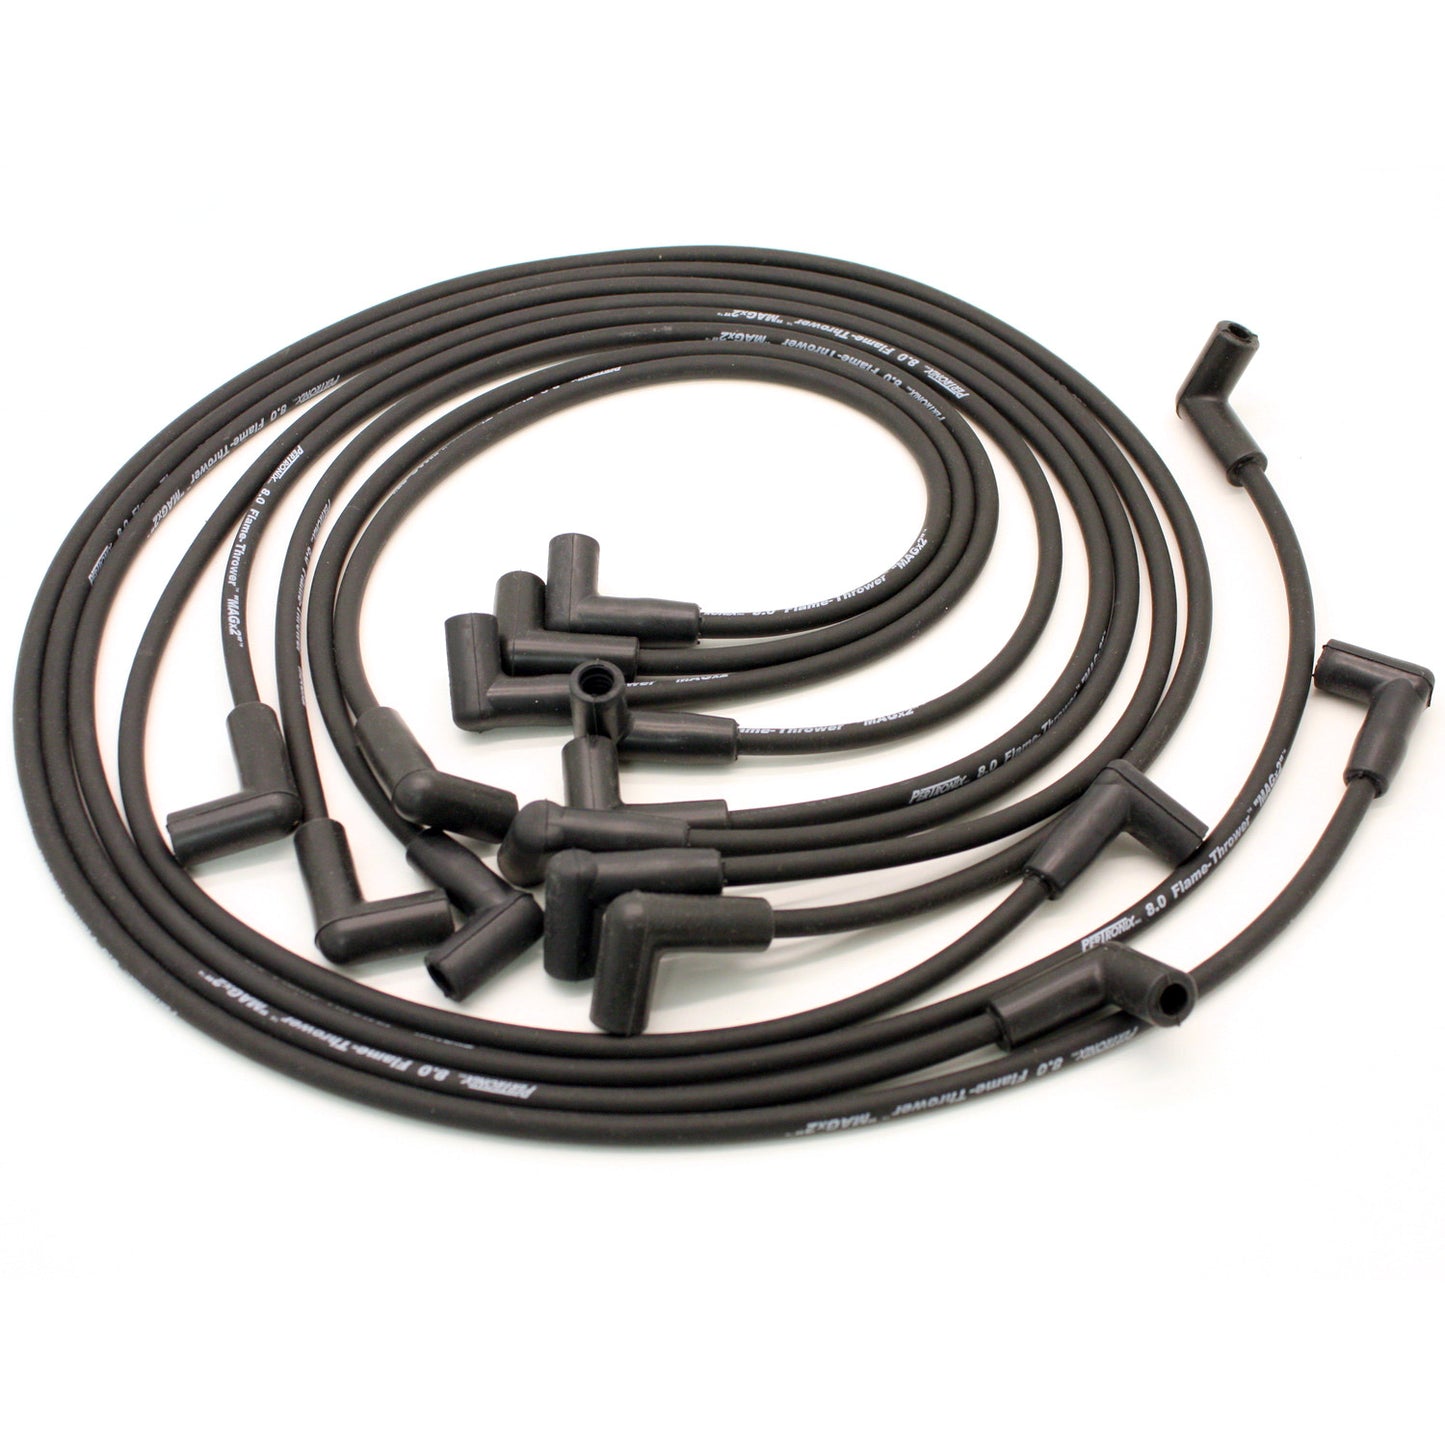 PerTronix 808213 Flame-Thrower Spark Plug Wires 8 cyl 8mm 74-82 Corvette HEI Custom Fit Black